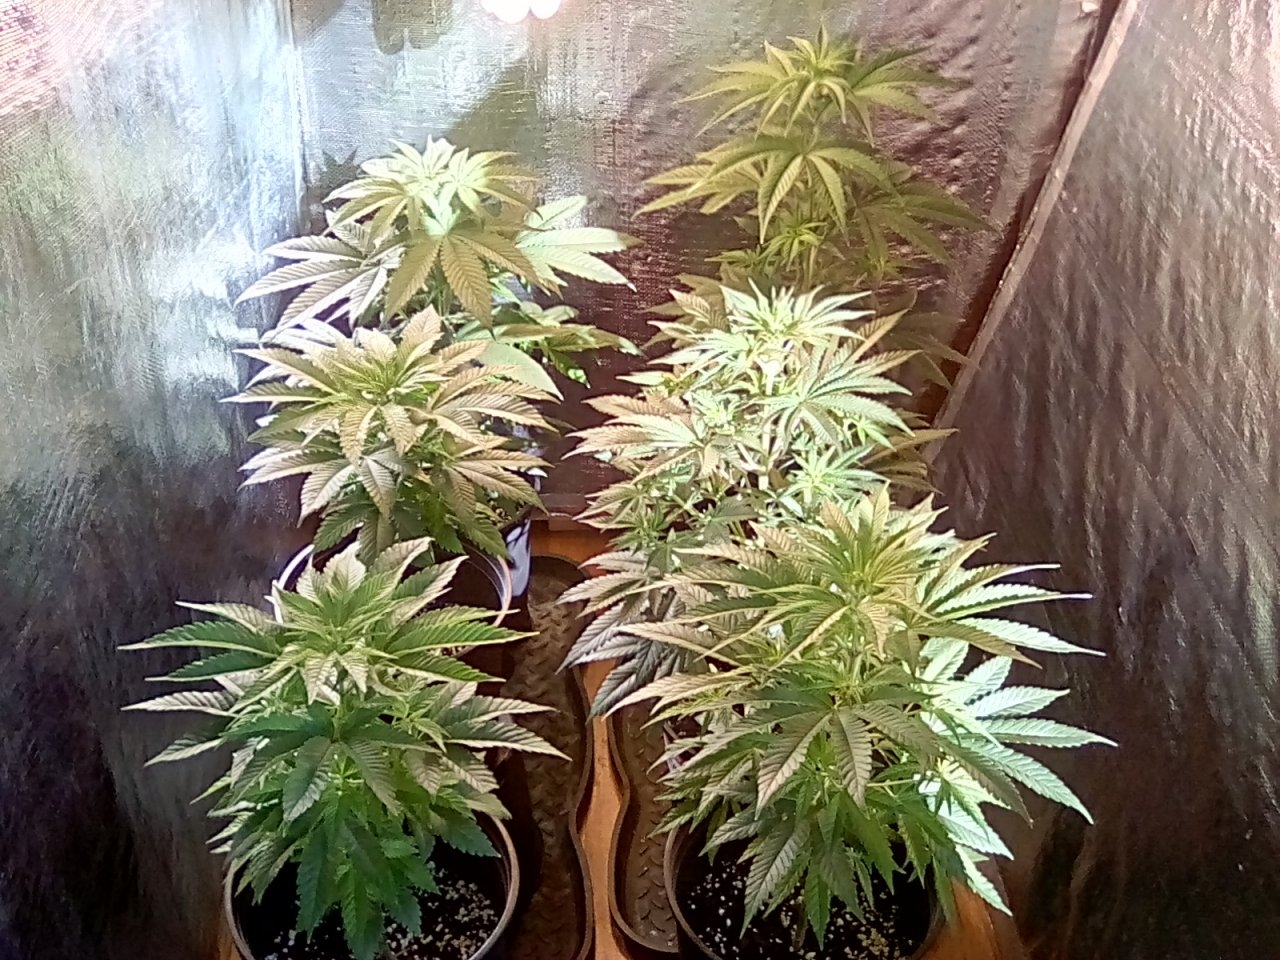 Day 15 and 7 of the flip